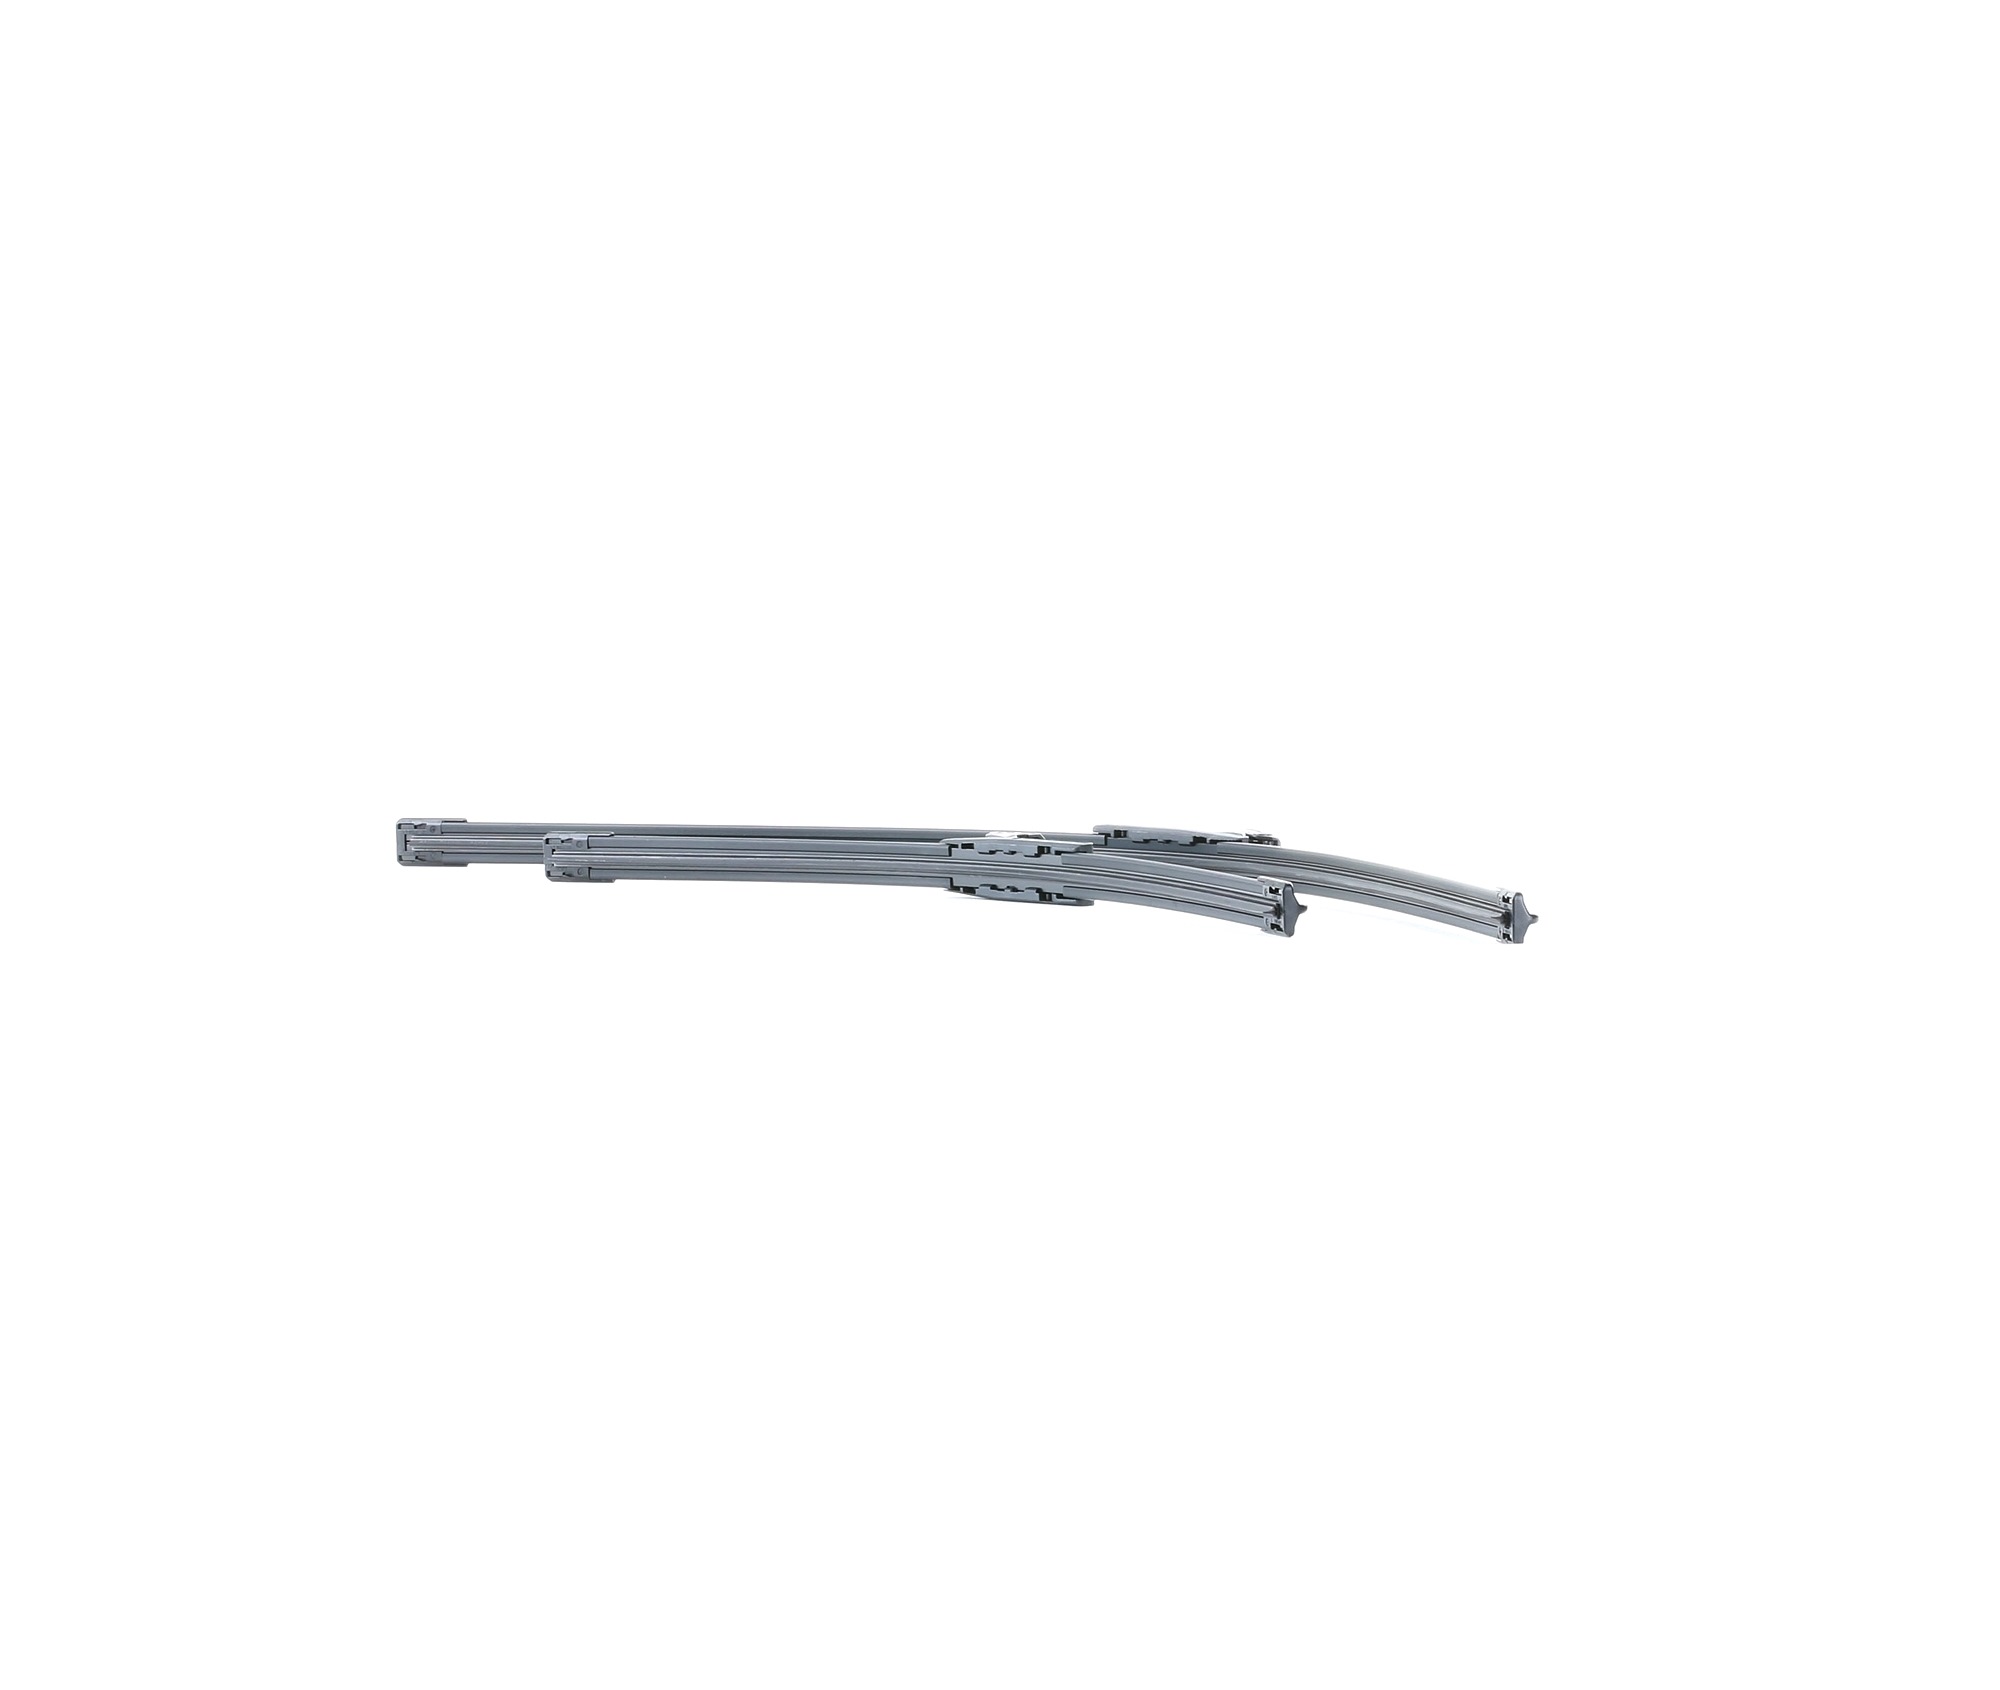 STARK SKWIB-0940180 Wiper blade 700, 450 mm Front, Beam, for left-hand drive vehicles